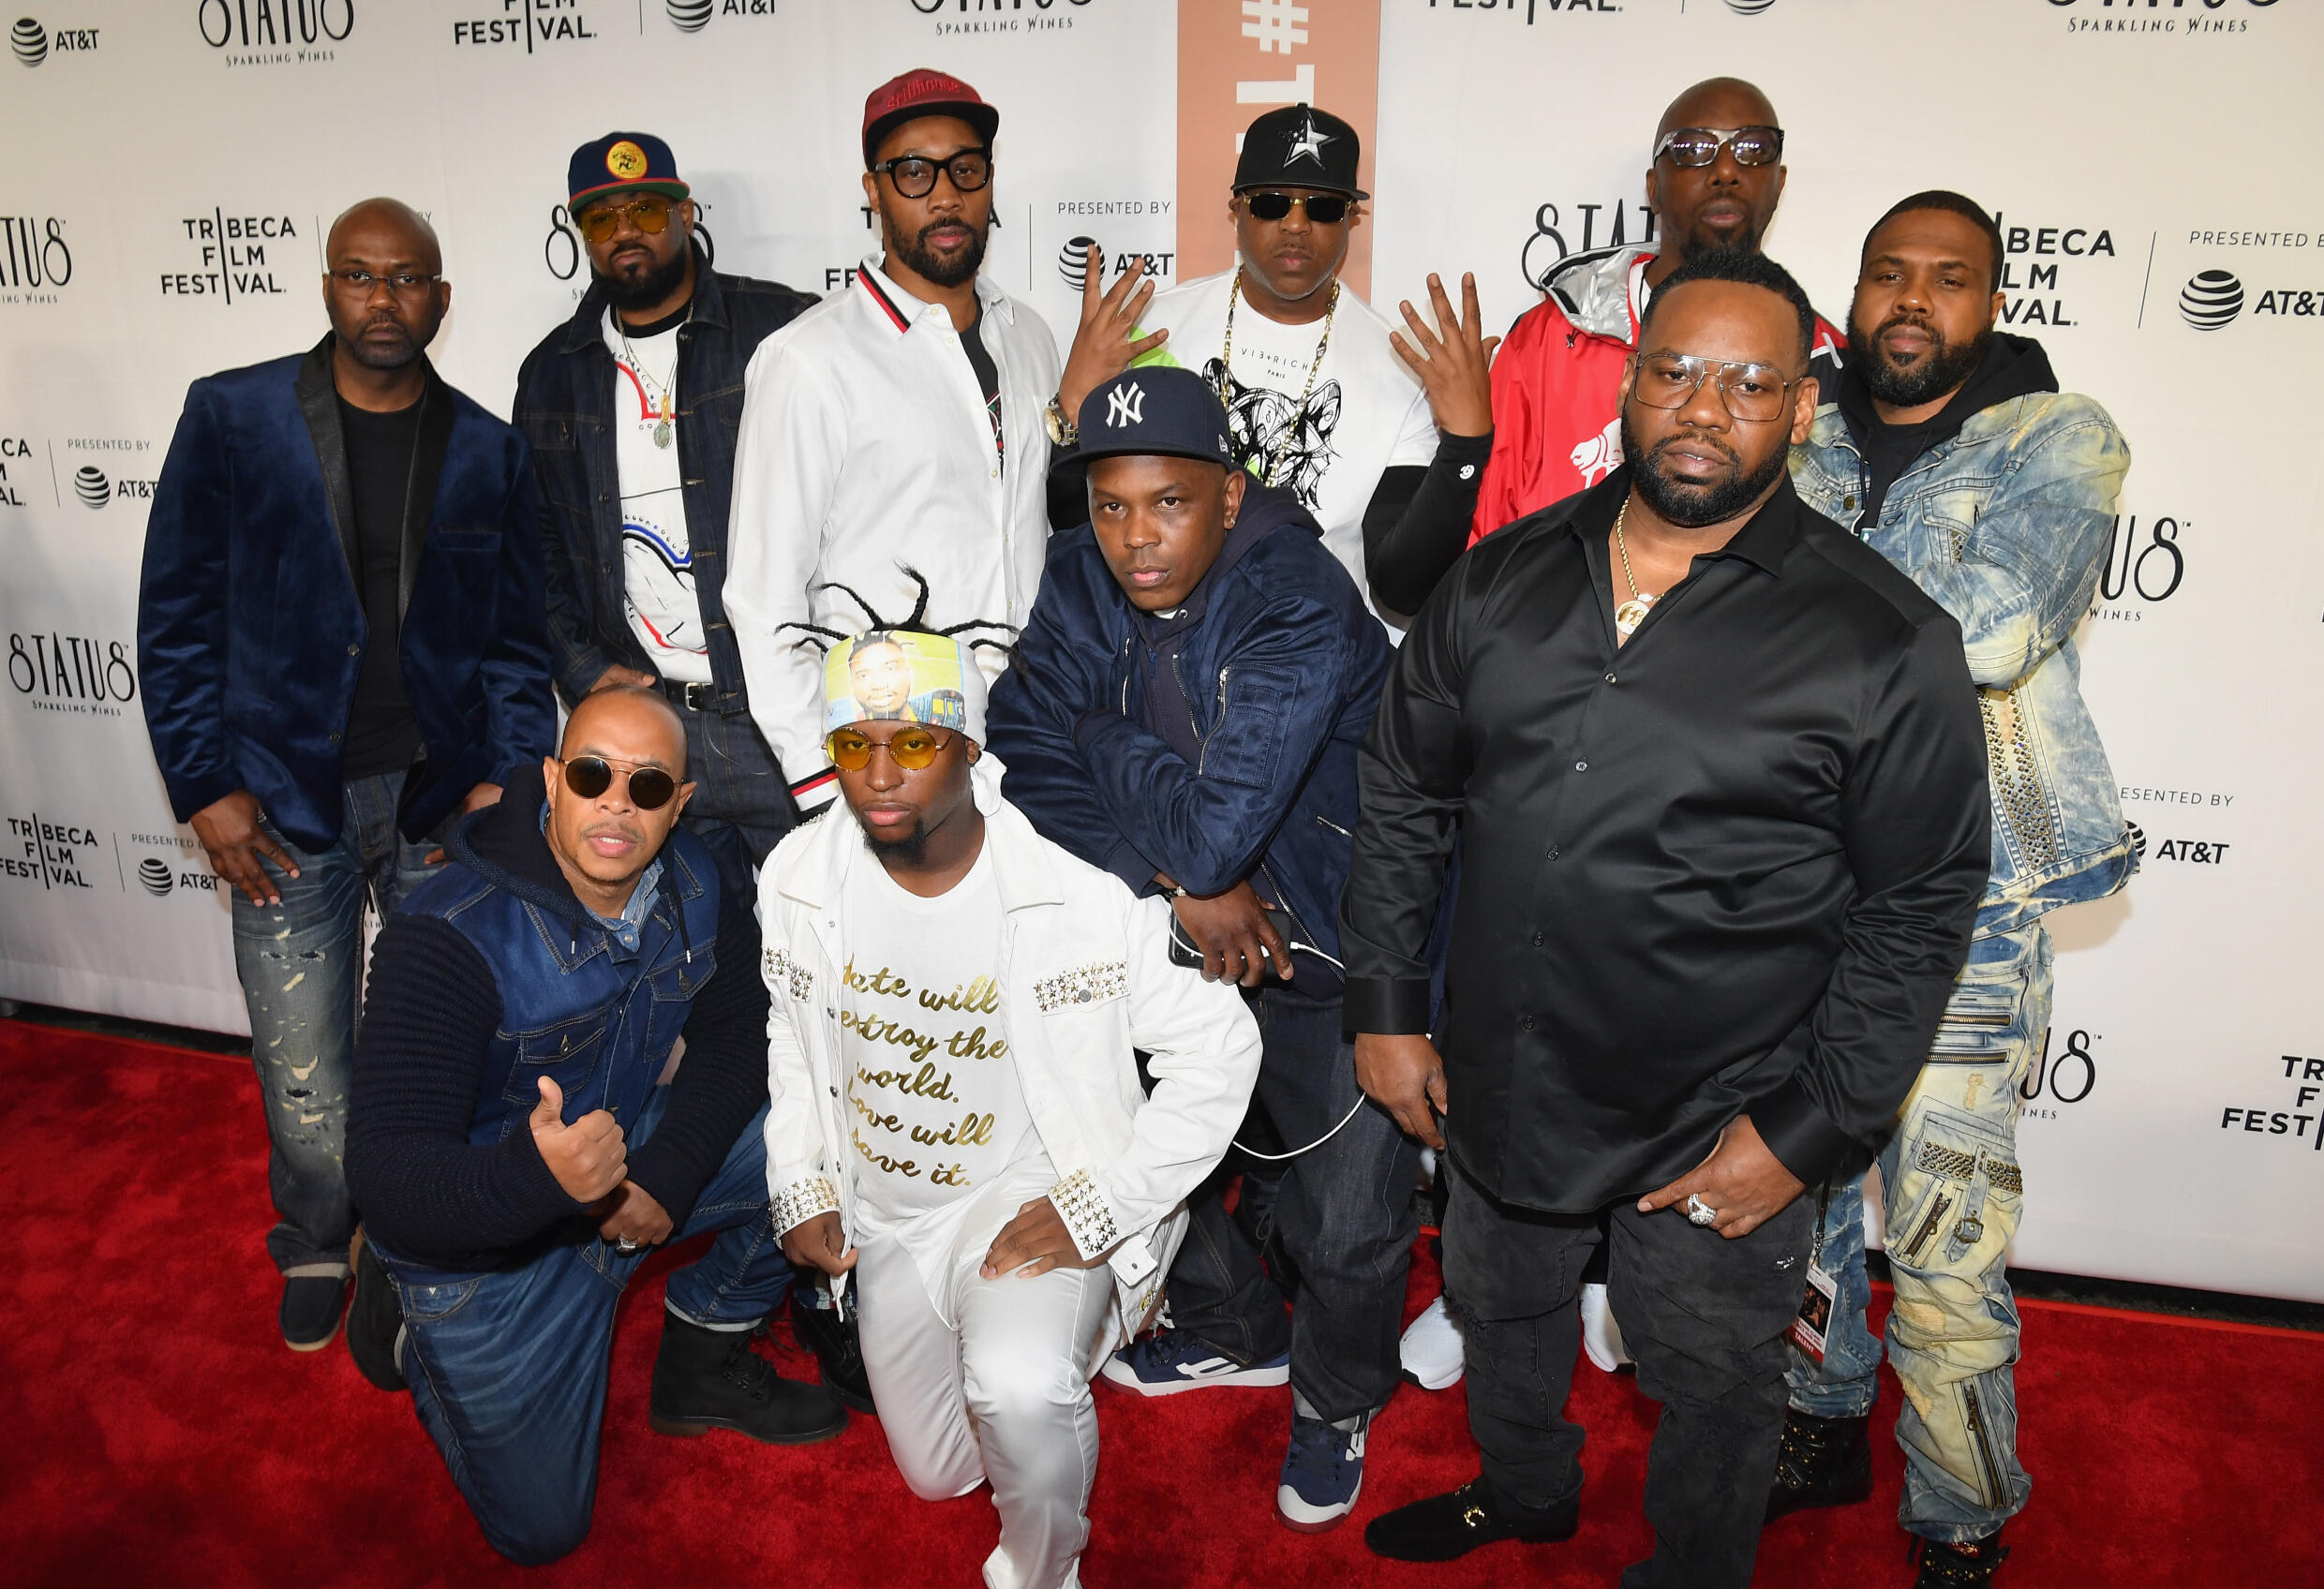 The American group Wu-Tang Clan in New York, April 25, 2019